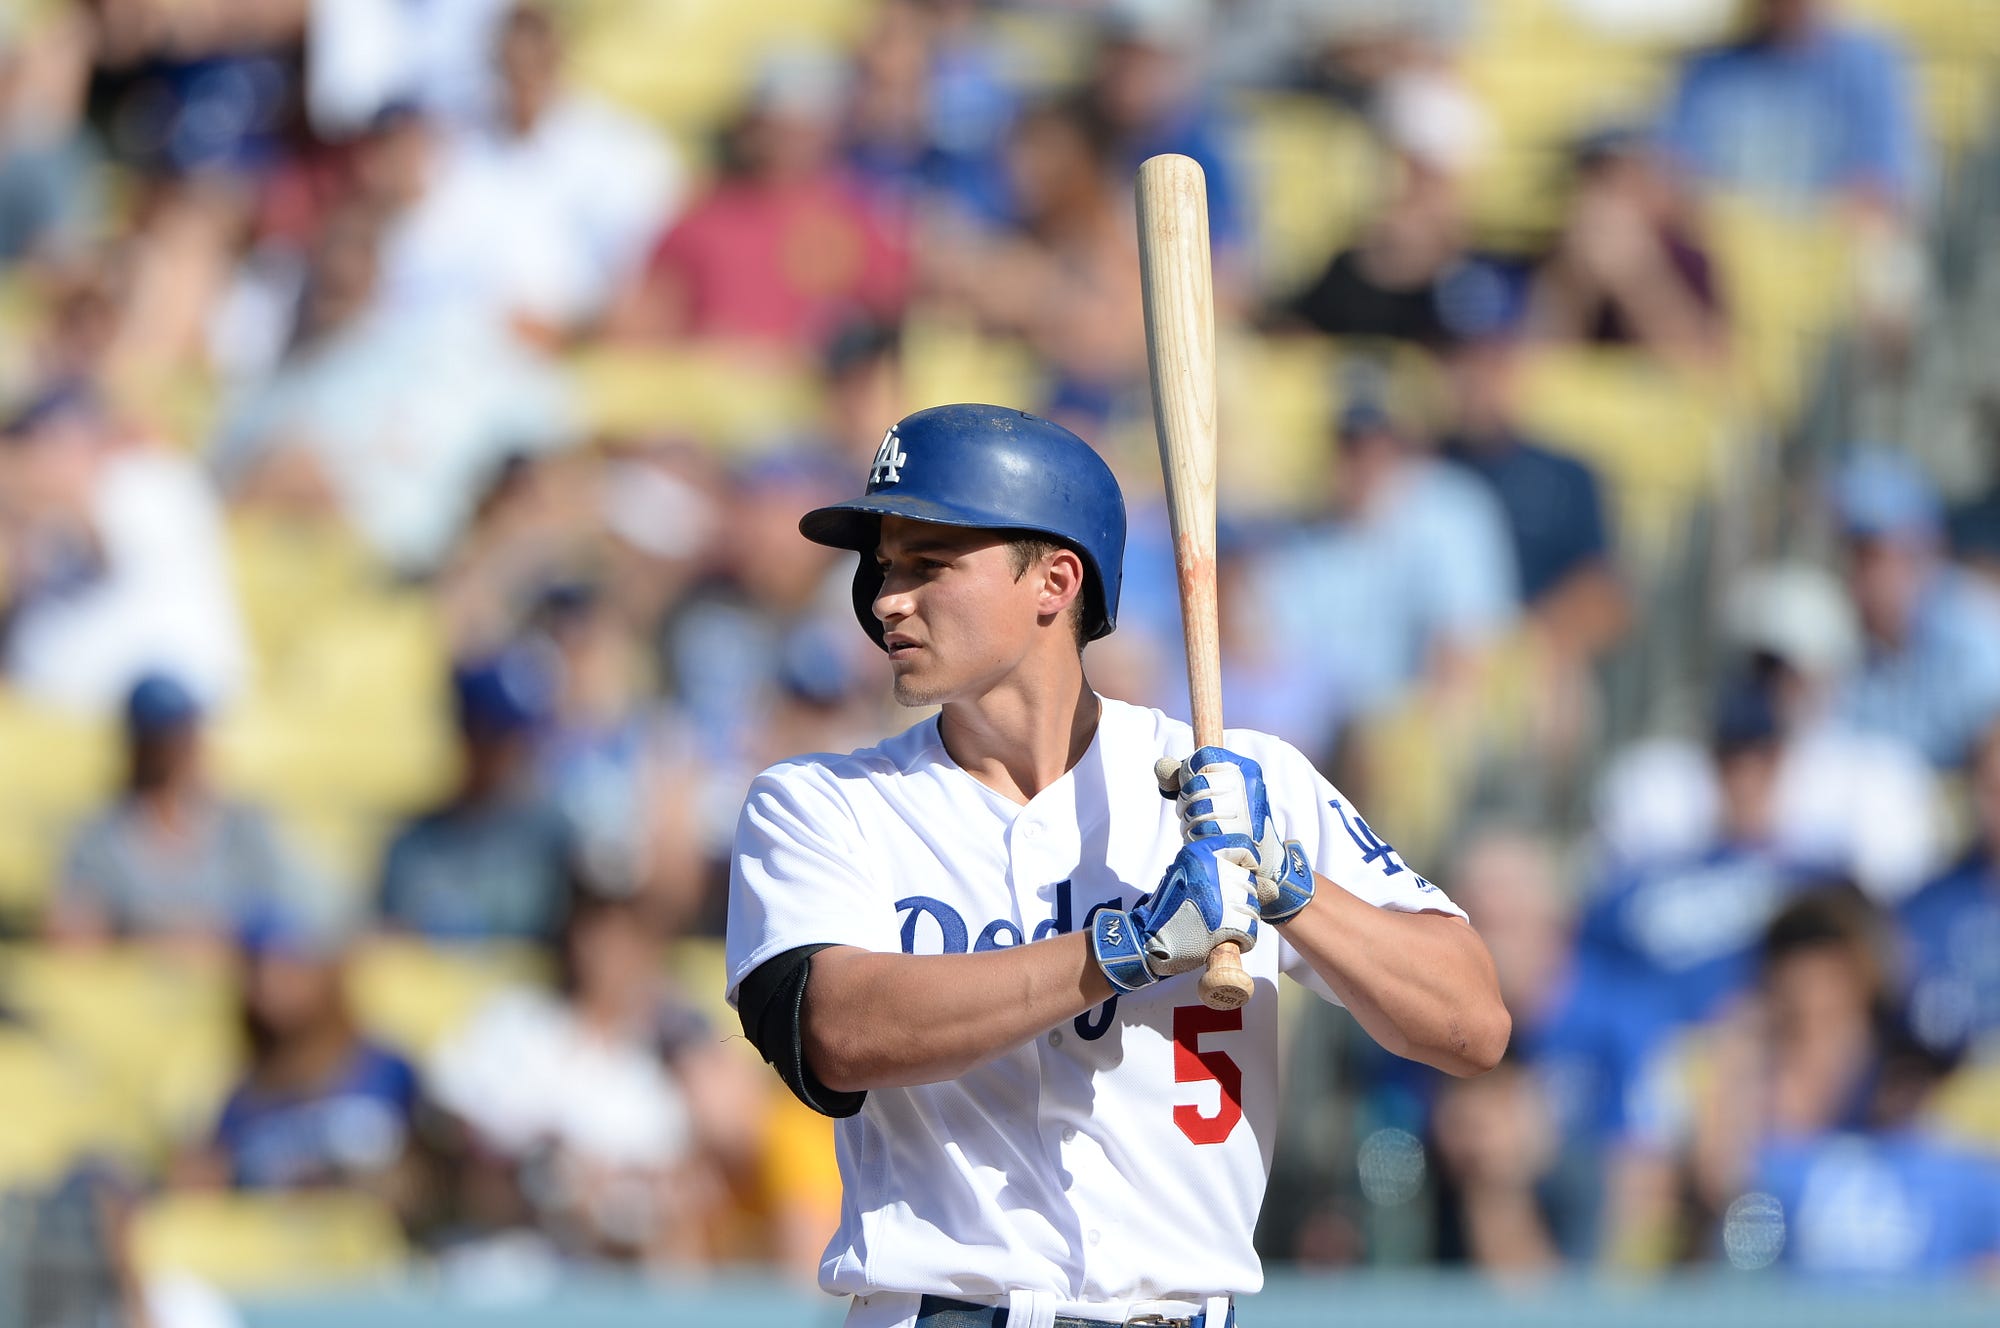 Corey Seager looks to conquer Dodgers' lefty-vs.-lefty challenge